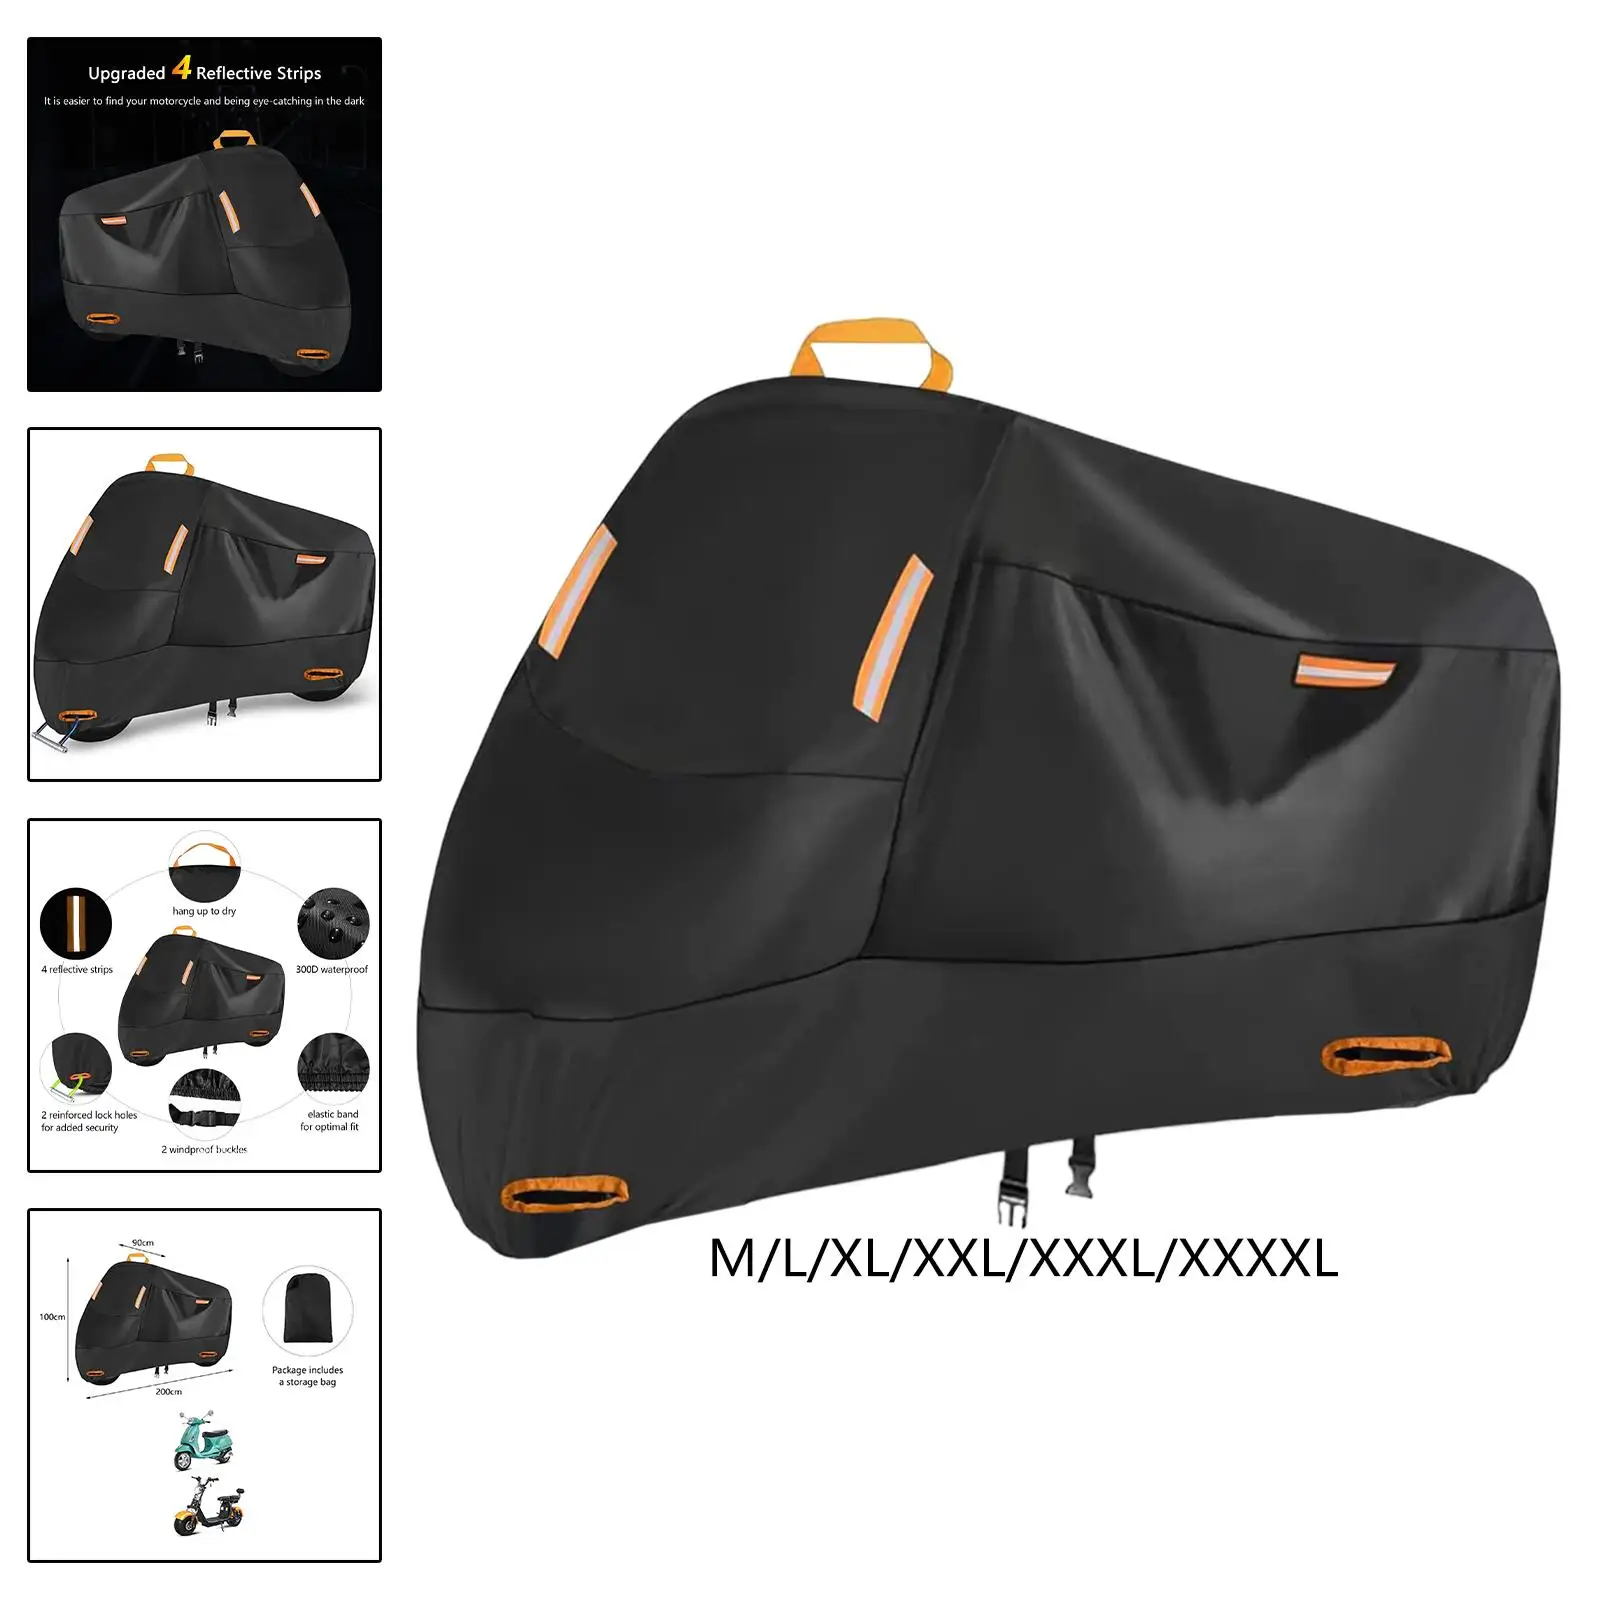 210D Motorcycle Cover Motocross Rain Cover for Scooter Motorbike Bike